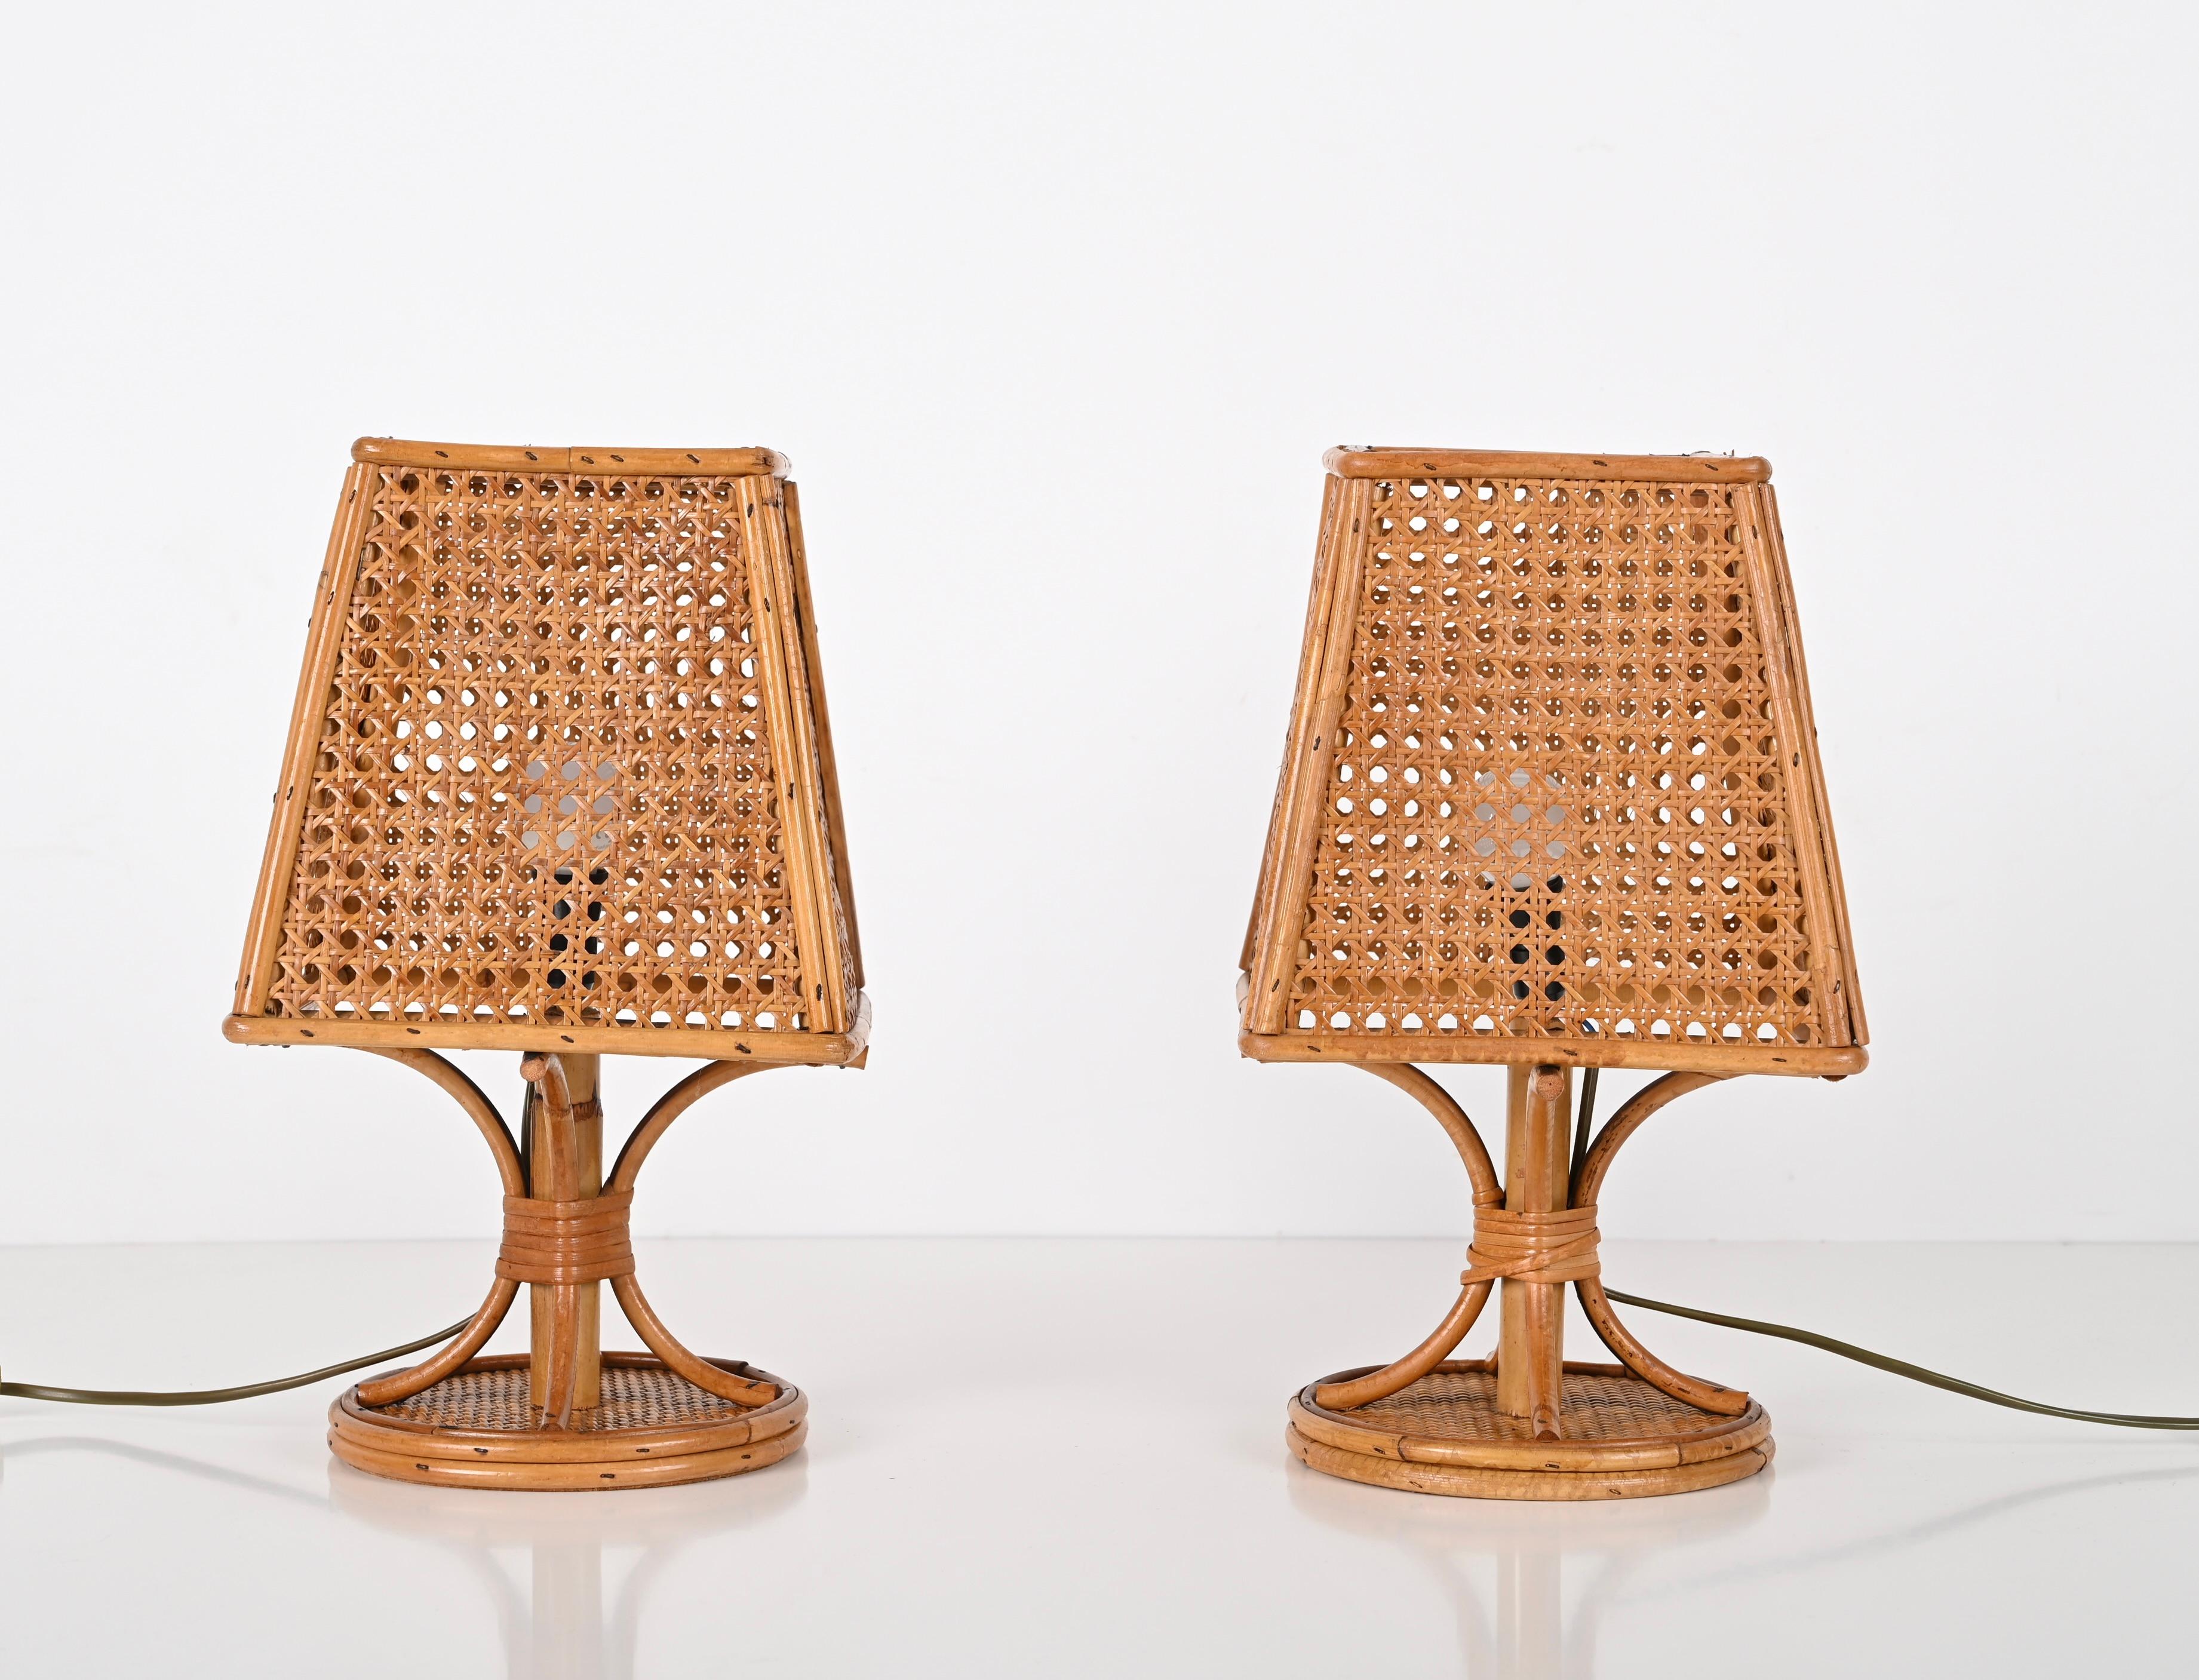 Pair of French Riviera Table Lamps in Wicker and Rattan, Italy 1960s For Sale 1